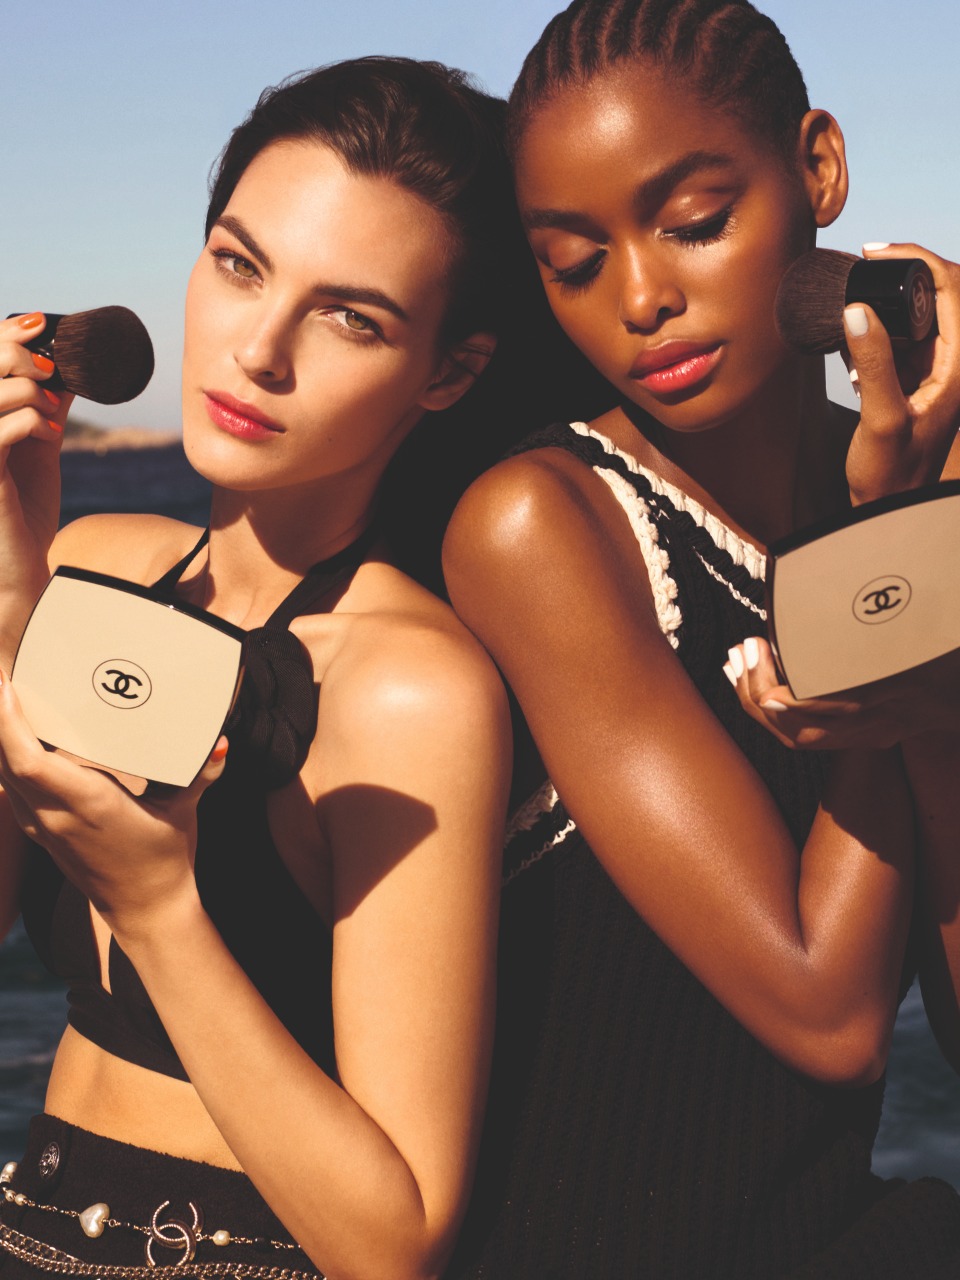 Chanel's Must-Have Summer Beauty Products - A&E Magazine